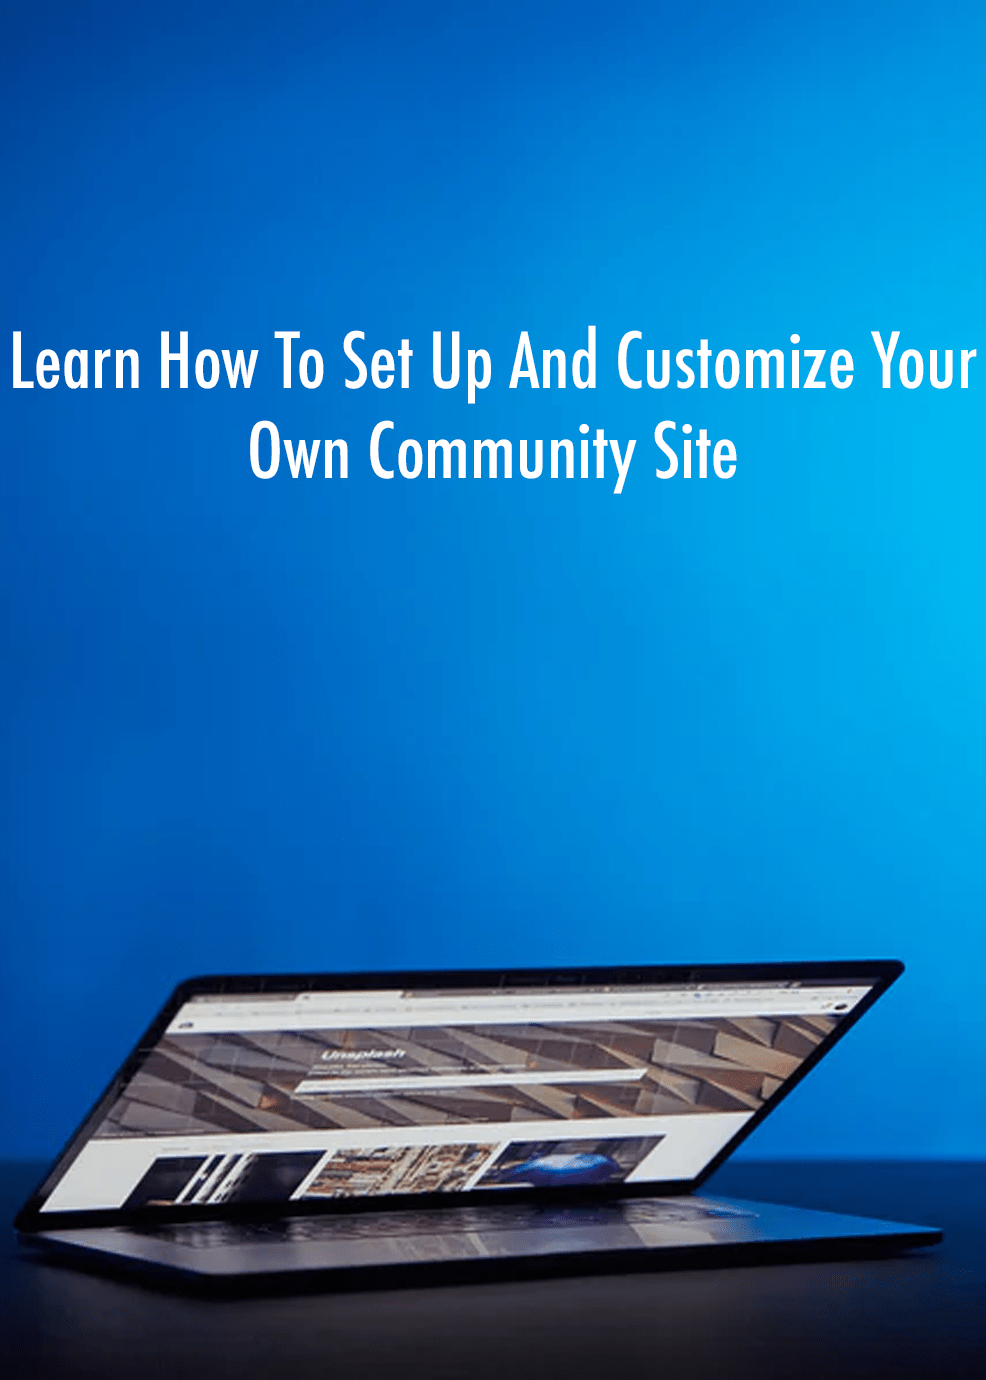 Learn How To Set Up And Customize Your Own Community Site